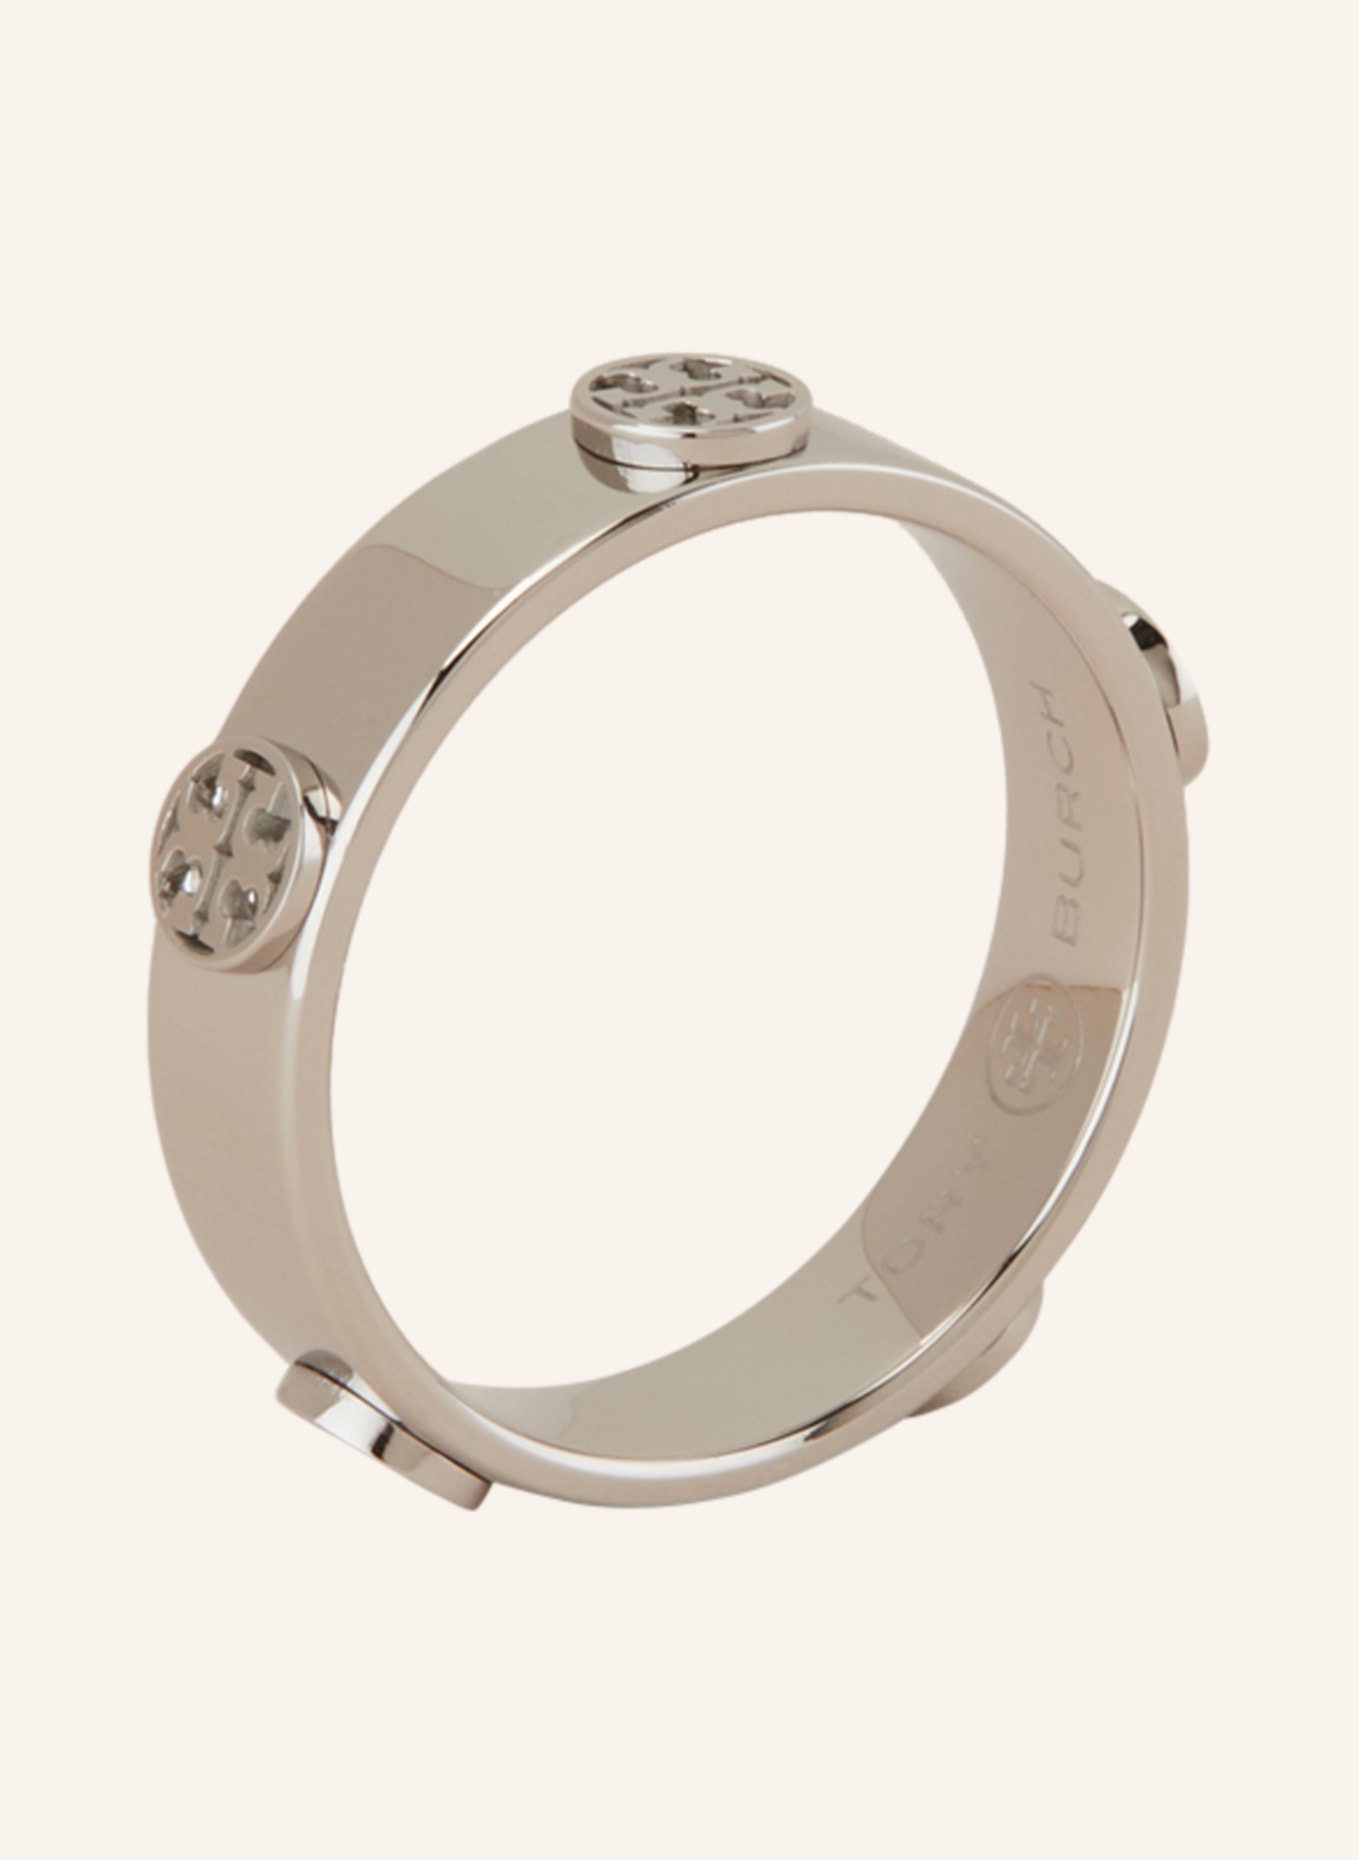 TORY BURCH Ring MILLER STUD in silver